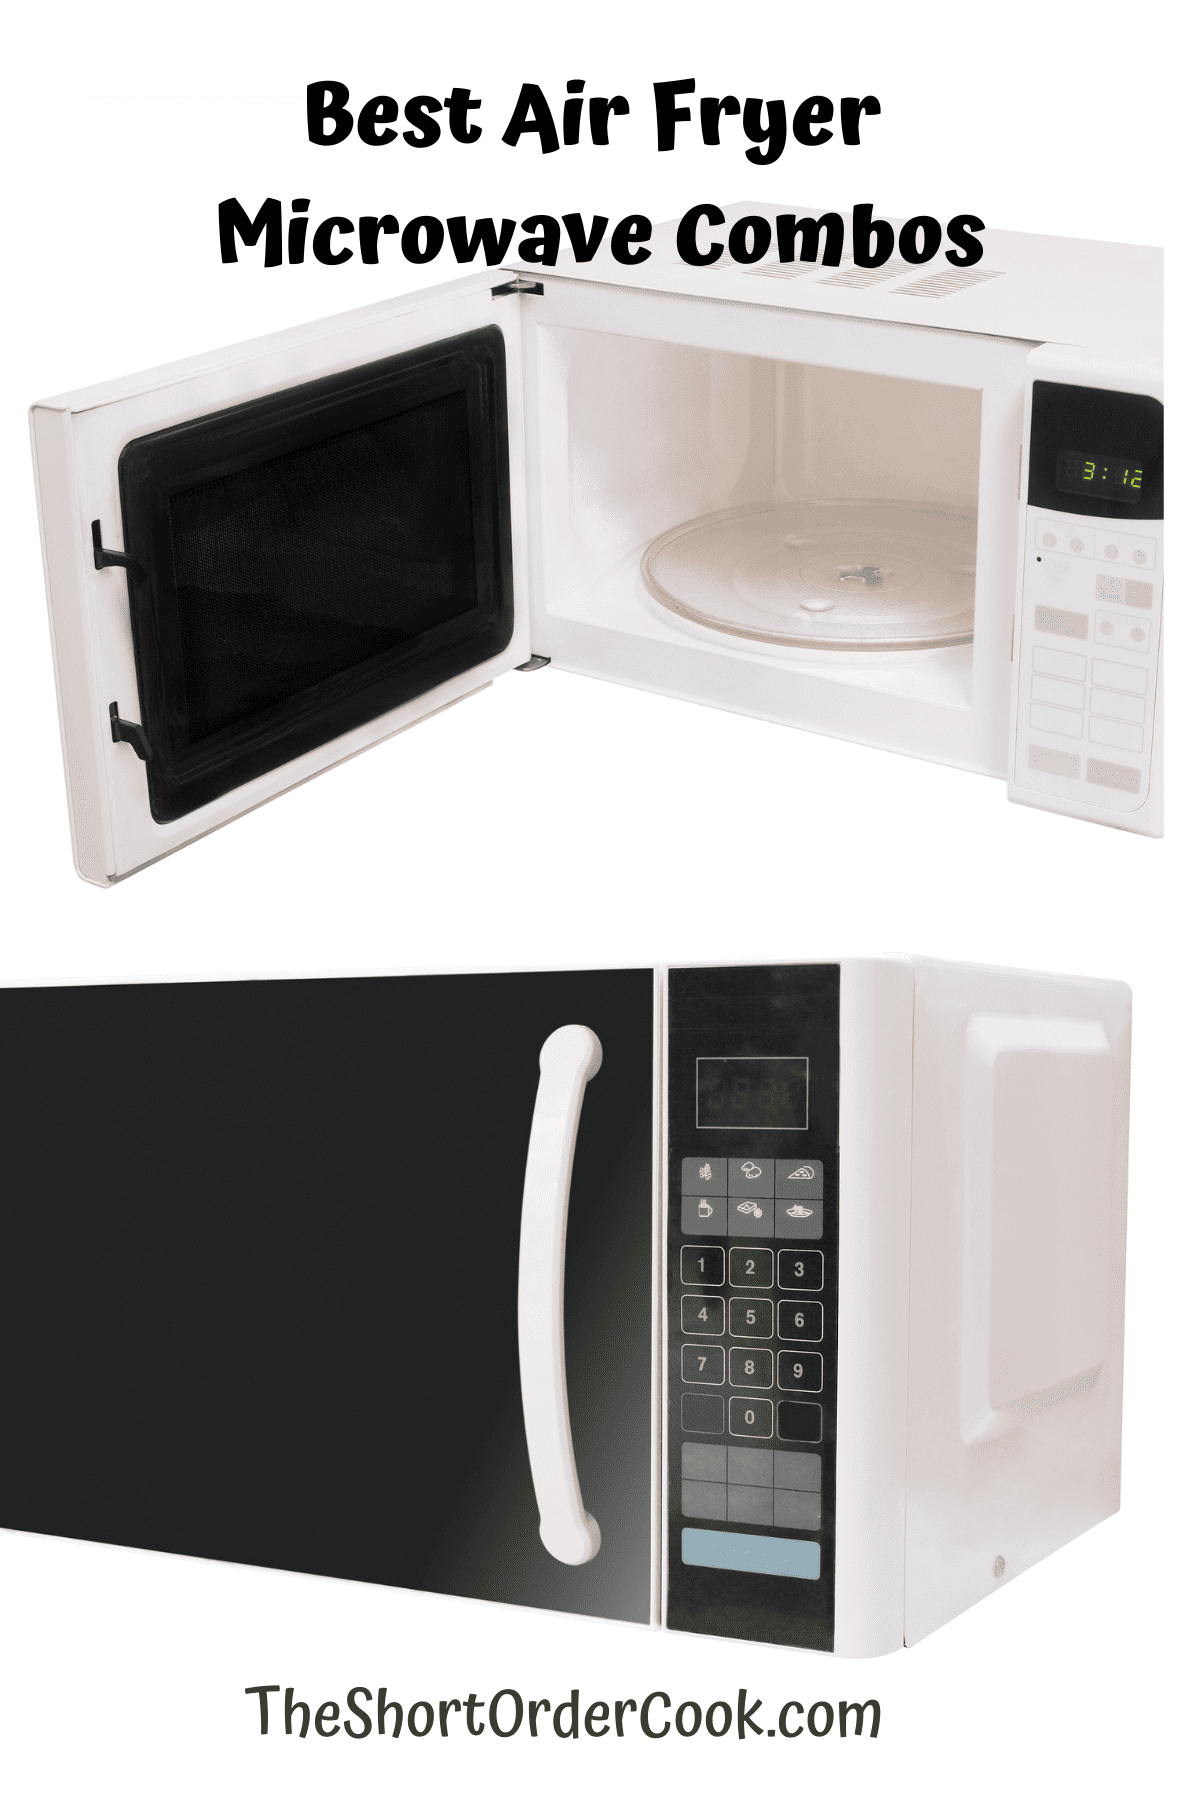 Two air fryer microwave models displayed for buying online.